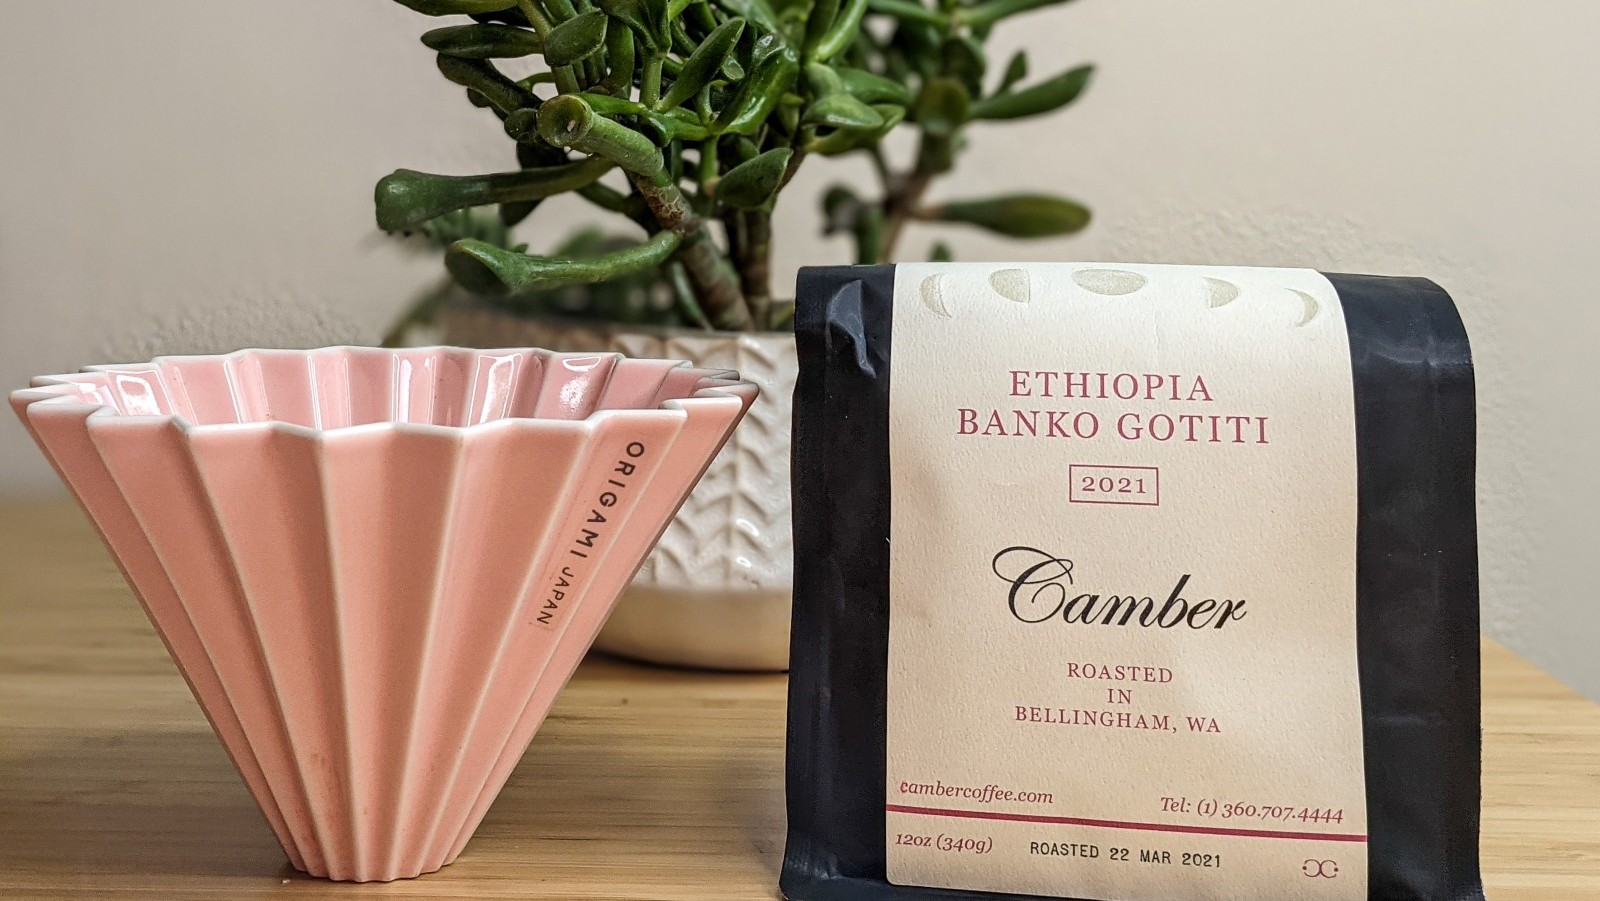 Image of Brewing Ethiopian Bank Gotiti by Camber Coffee with Meghan-Annette